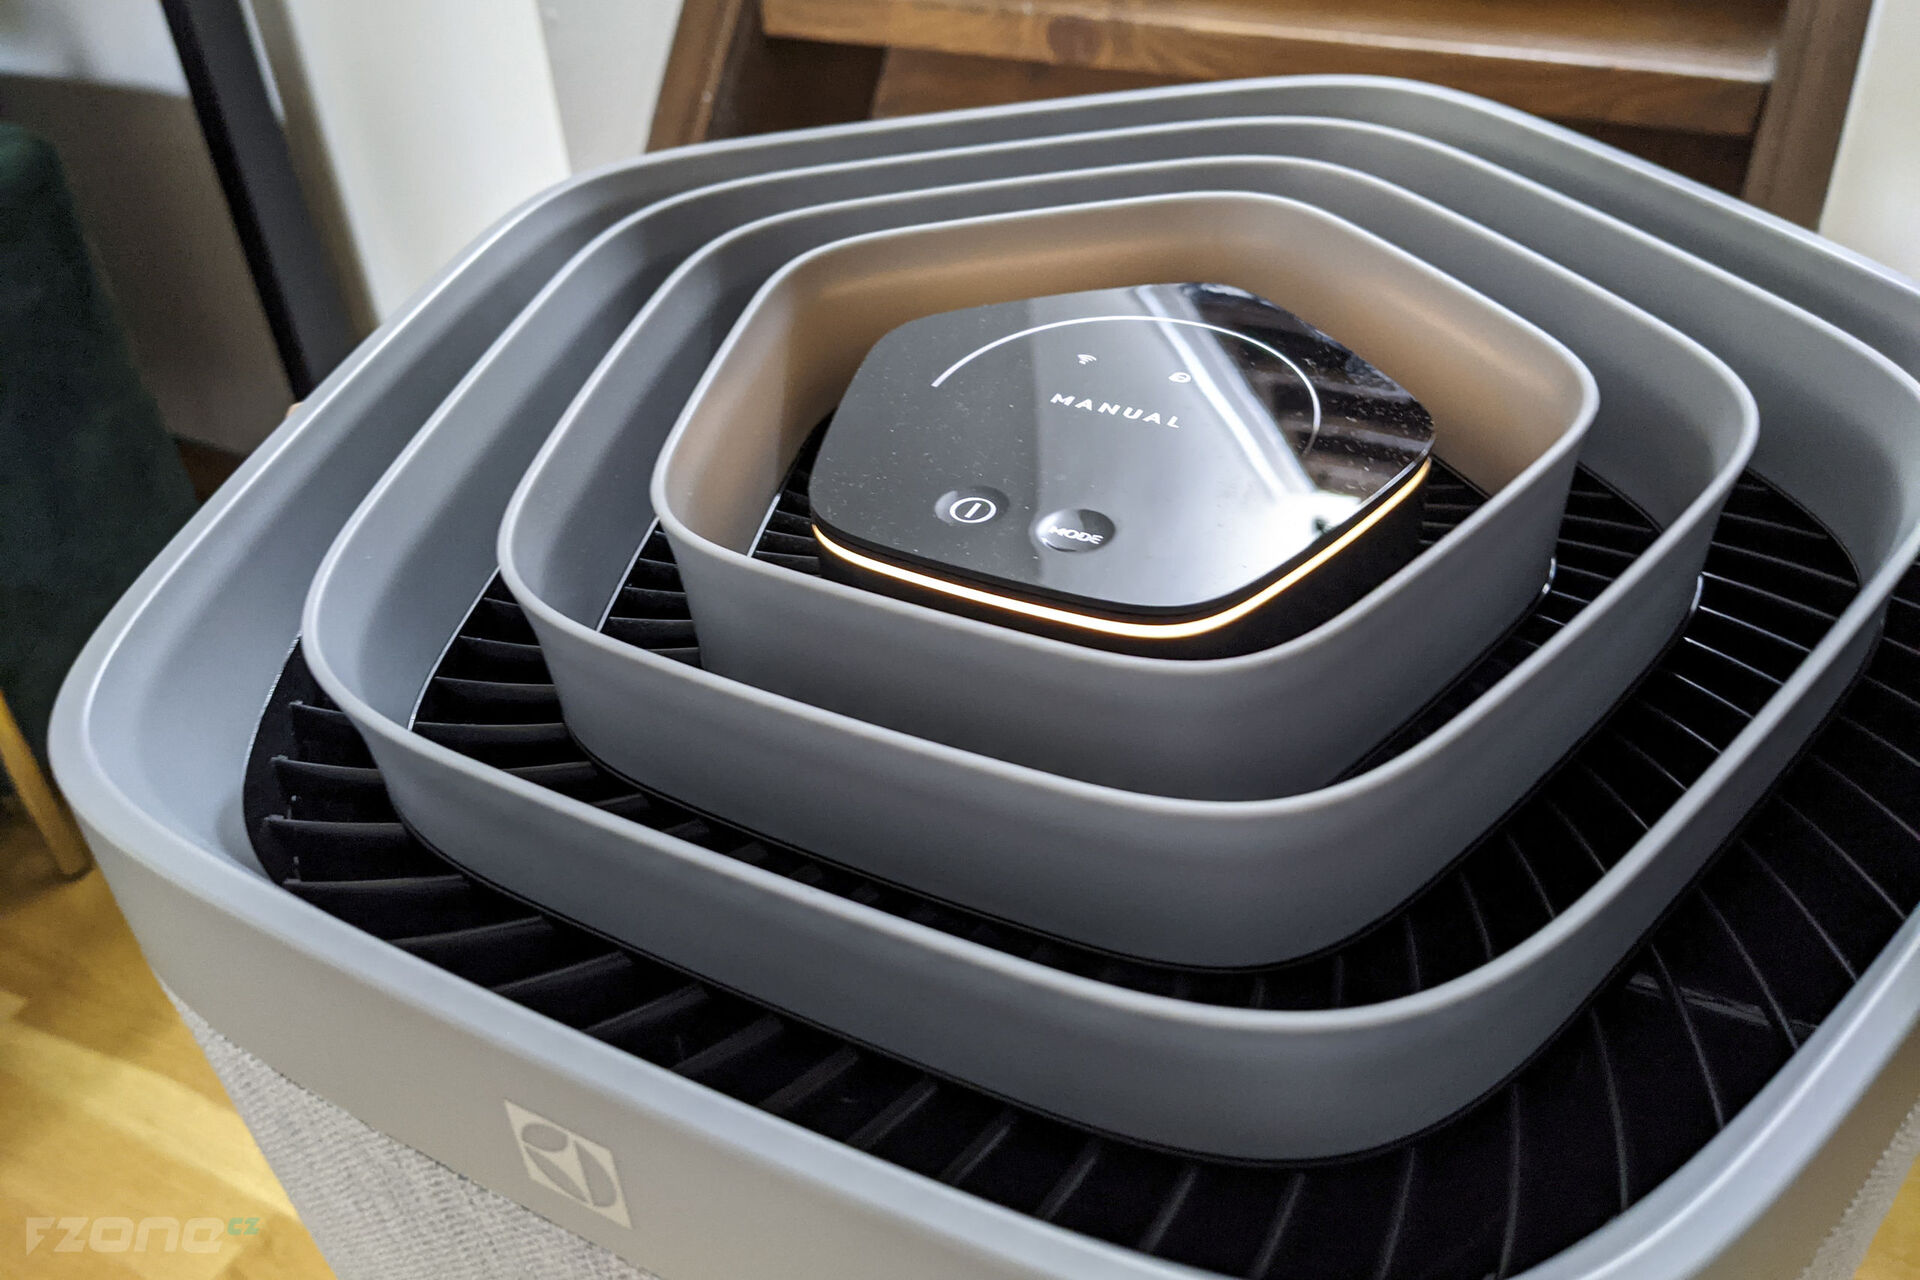 Electrolux Pure A9